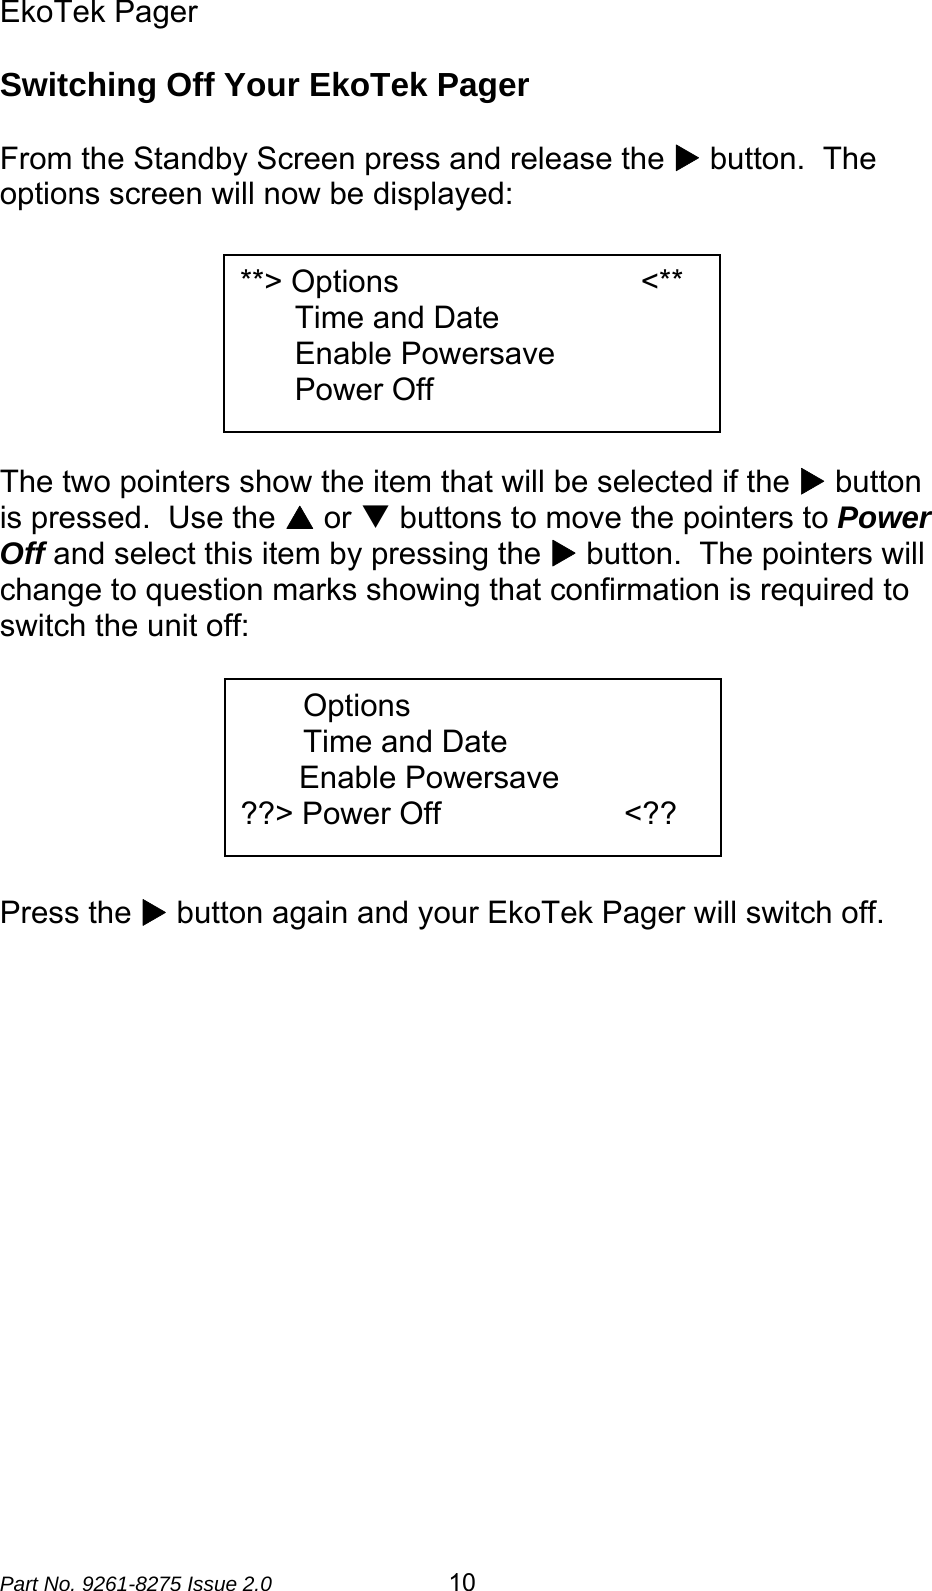 EkoTek Pager  Part No. 9261-8275 Issue 2.0   10 Switching Off Your EkoTek Pager  From the Standby Screen press and release the X button.  The options screen will now be displayed:        The two pointers show the item that will be selected if the X button is pressed.  Use the S or T buttons to move the pointers to Power Off and select this item by pressing the X button.  The pointers will change to question marks showing that confirmation is required to switch the unit off:        Press the X button again and your EkoTek Pager will switch off.   **&gt; Options              &lt;**   Time and Date   Enable Powersave   Power Off Options Time and Date  Enable Powersave ??&gt; Power Off                      &lt;?? 